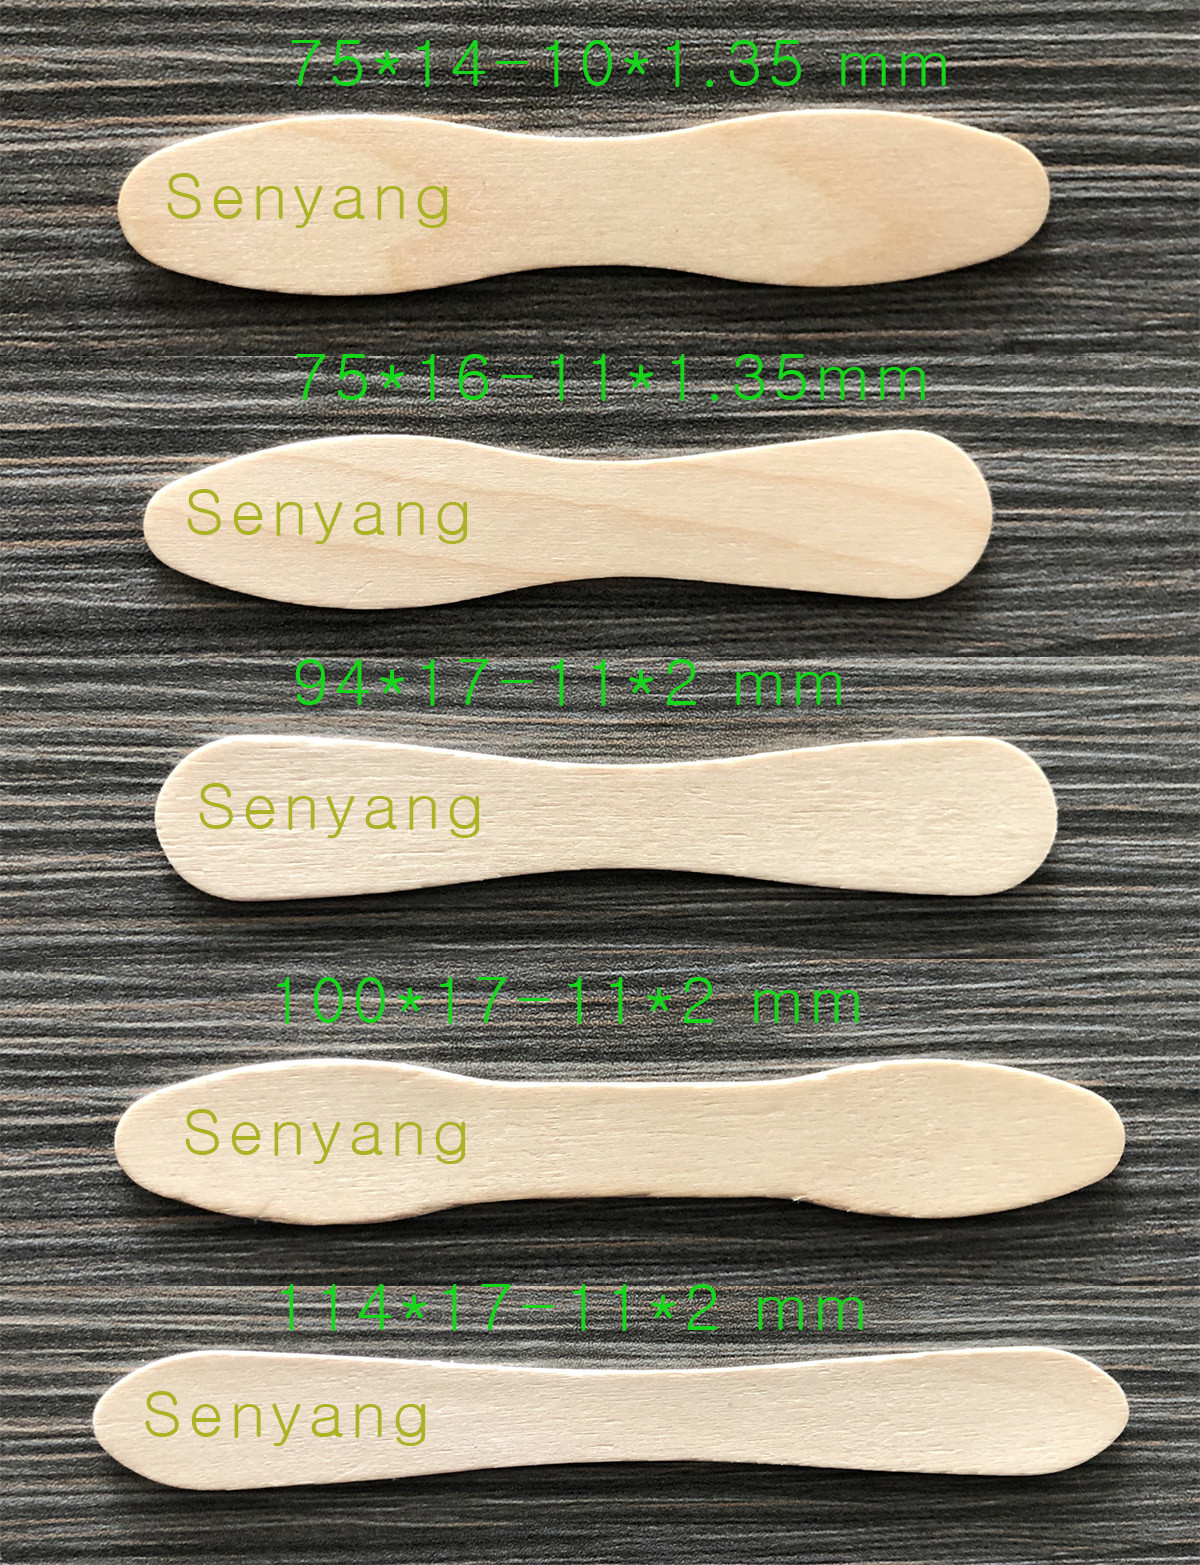 different sizes of wooden spoon, ice cream spoon, tea spoon from producer, supplier, factory, manufacturer of Tianjin Senyangwood Co., Limited, China.